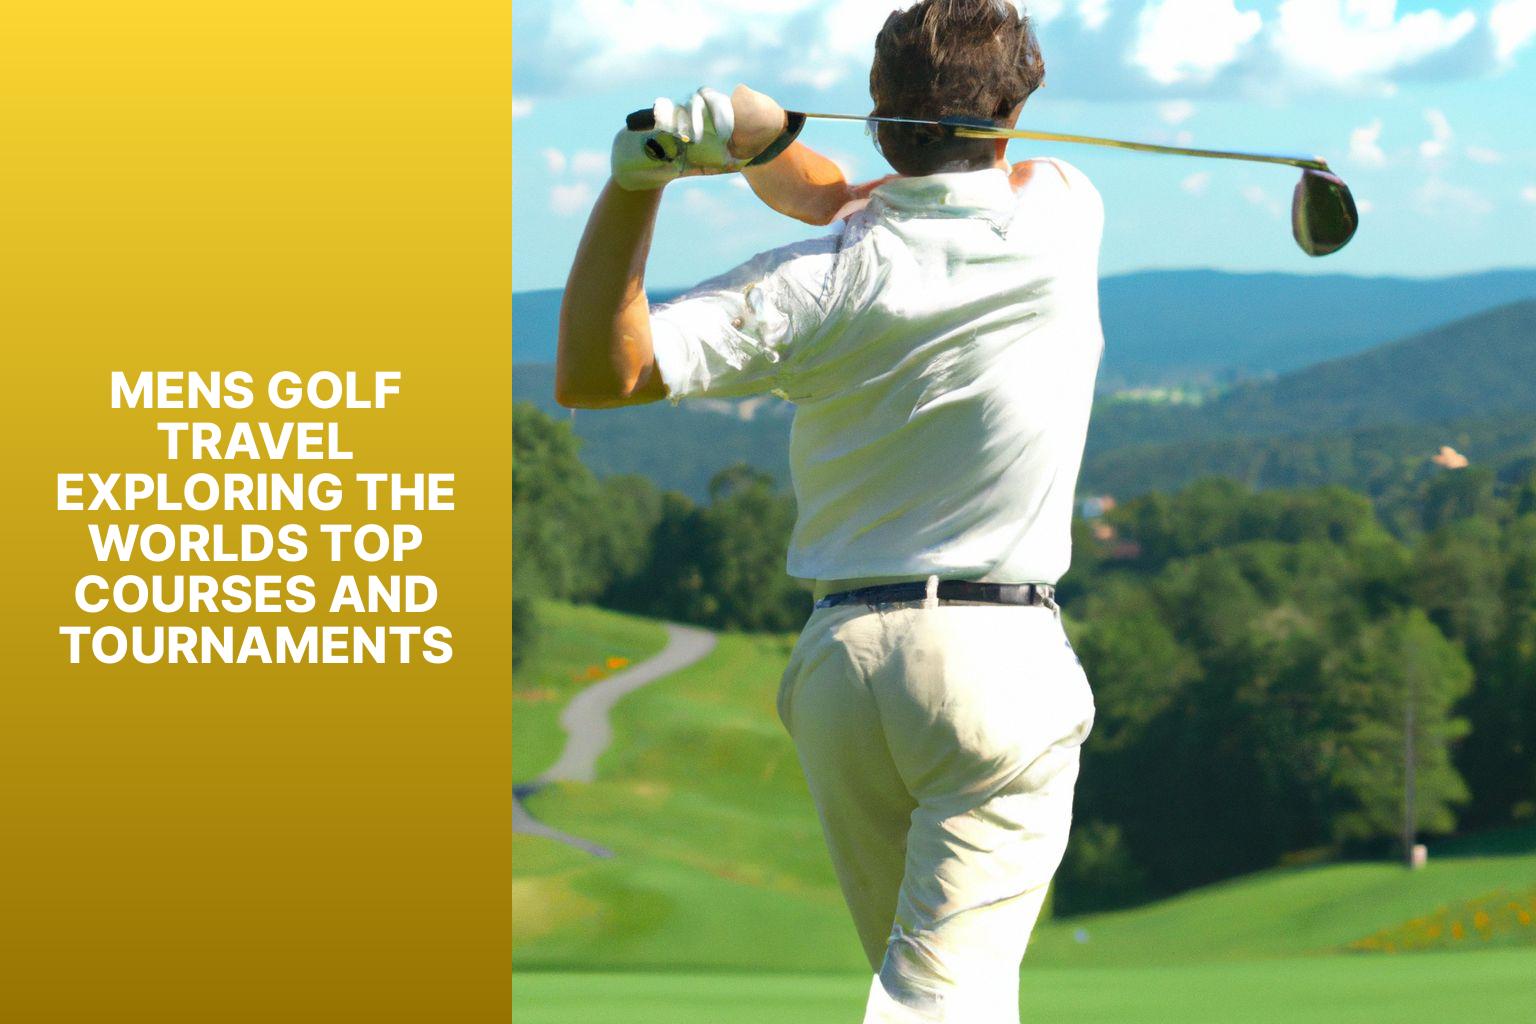 Men’s Golf Travel: Exploring the World’s Top Courses and Tournaments